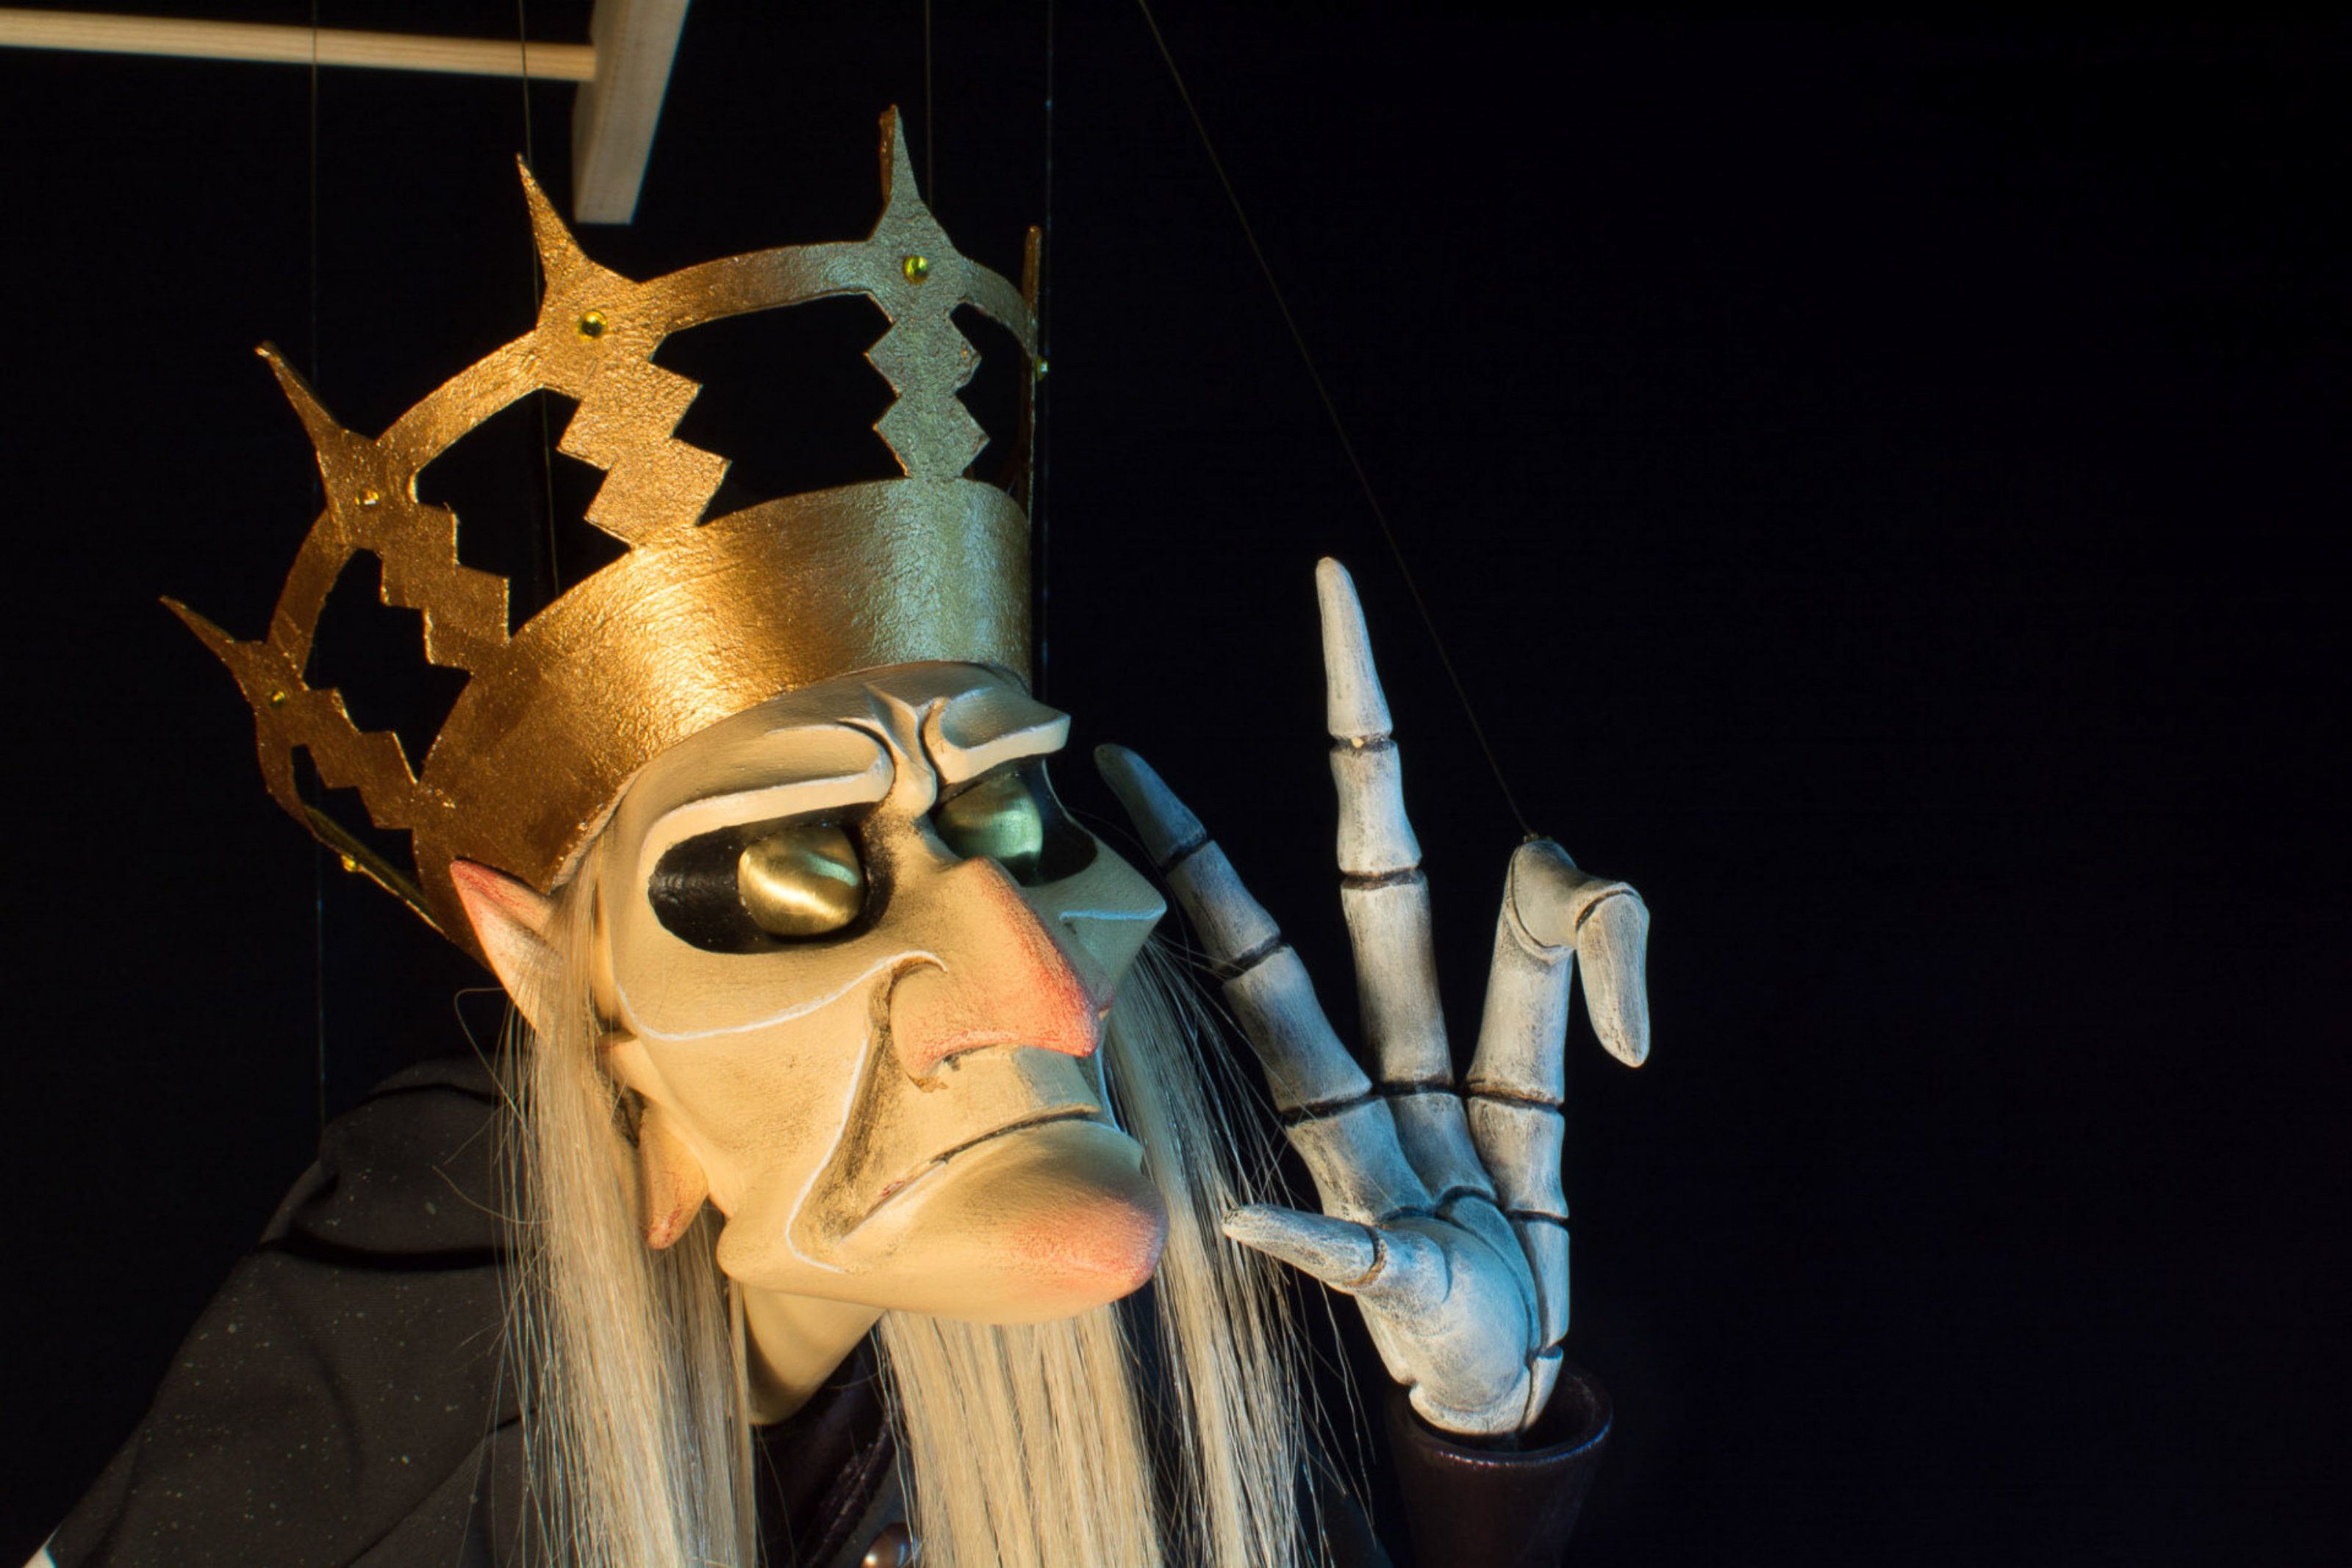 Welcome to the world of original marionettes and puppets.